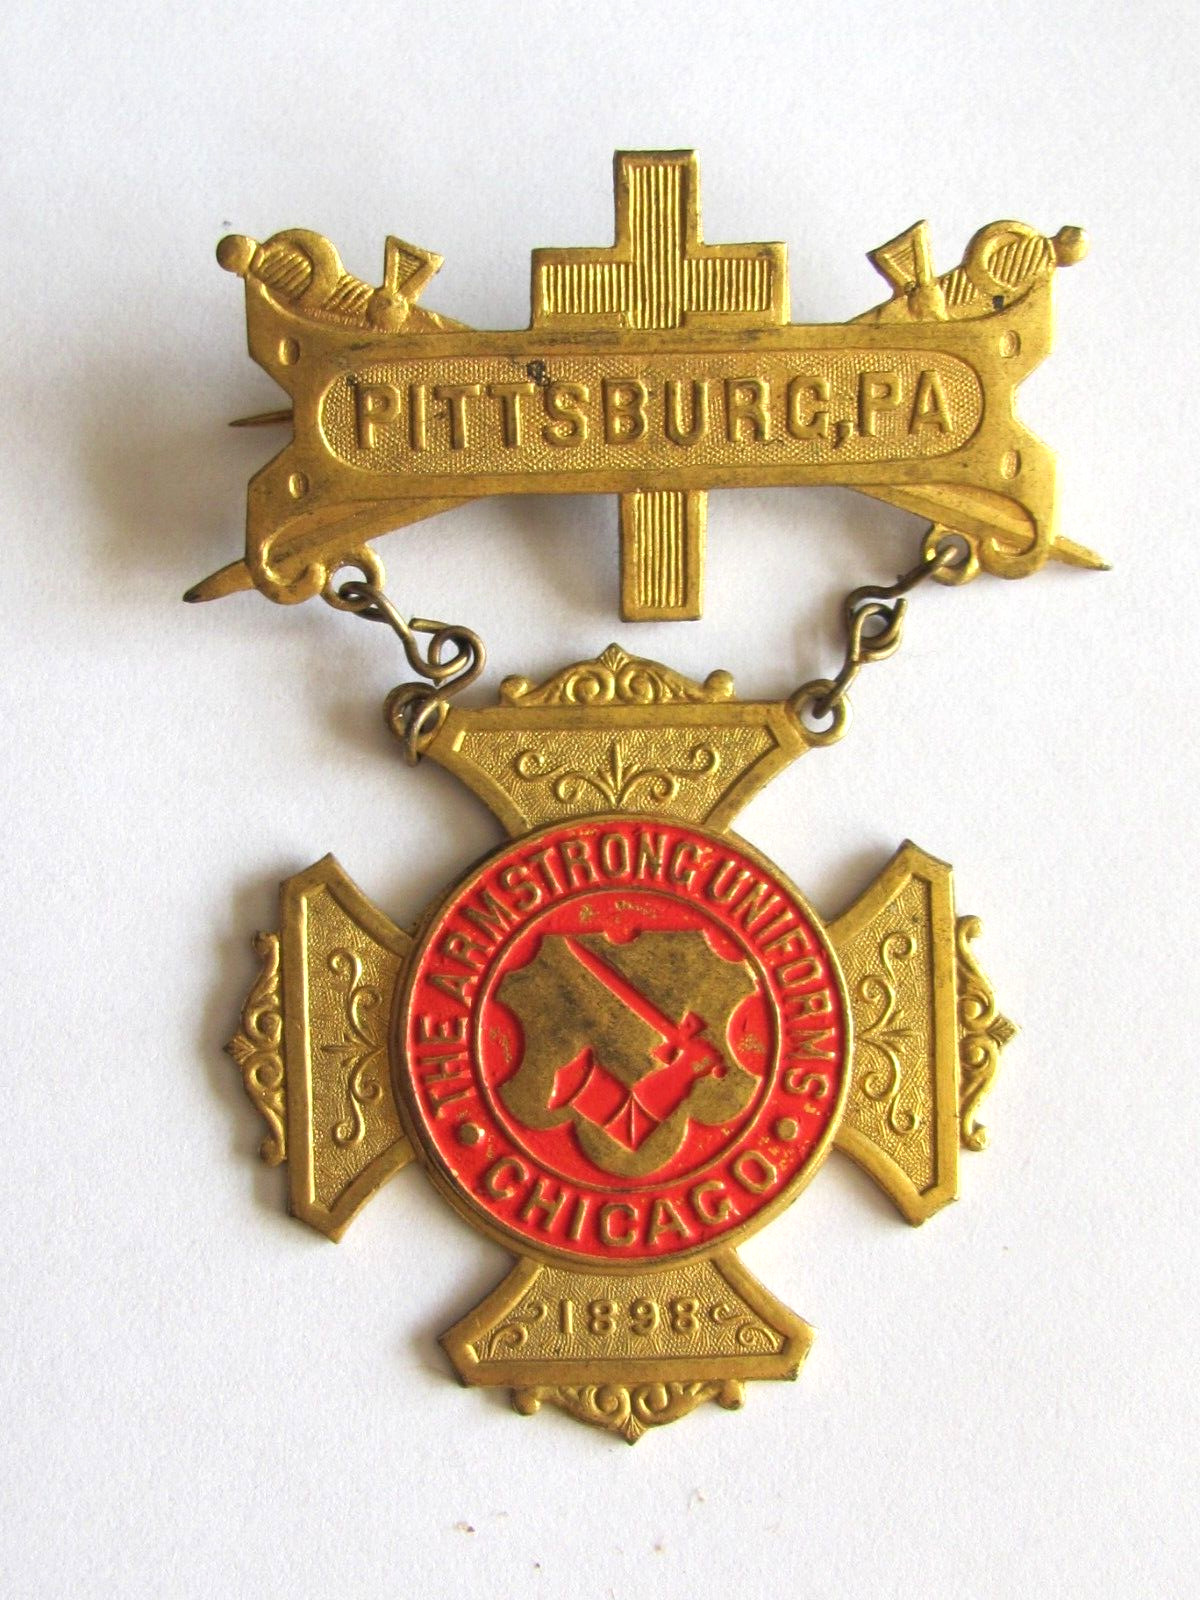 1898 KNIGHTS TEMPLAR PITTSBURG MEDAL ADVERTISING ARMSTRONG UNIFORMS CHICAGO